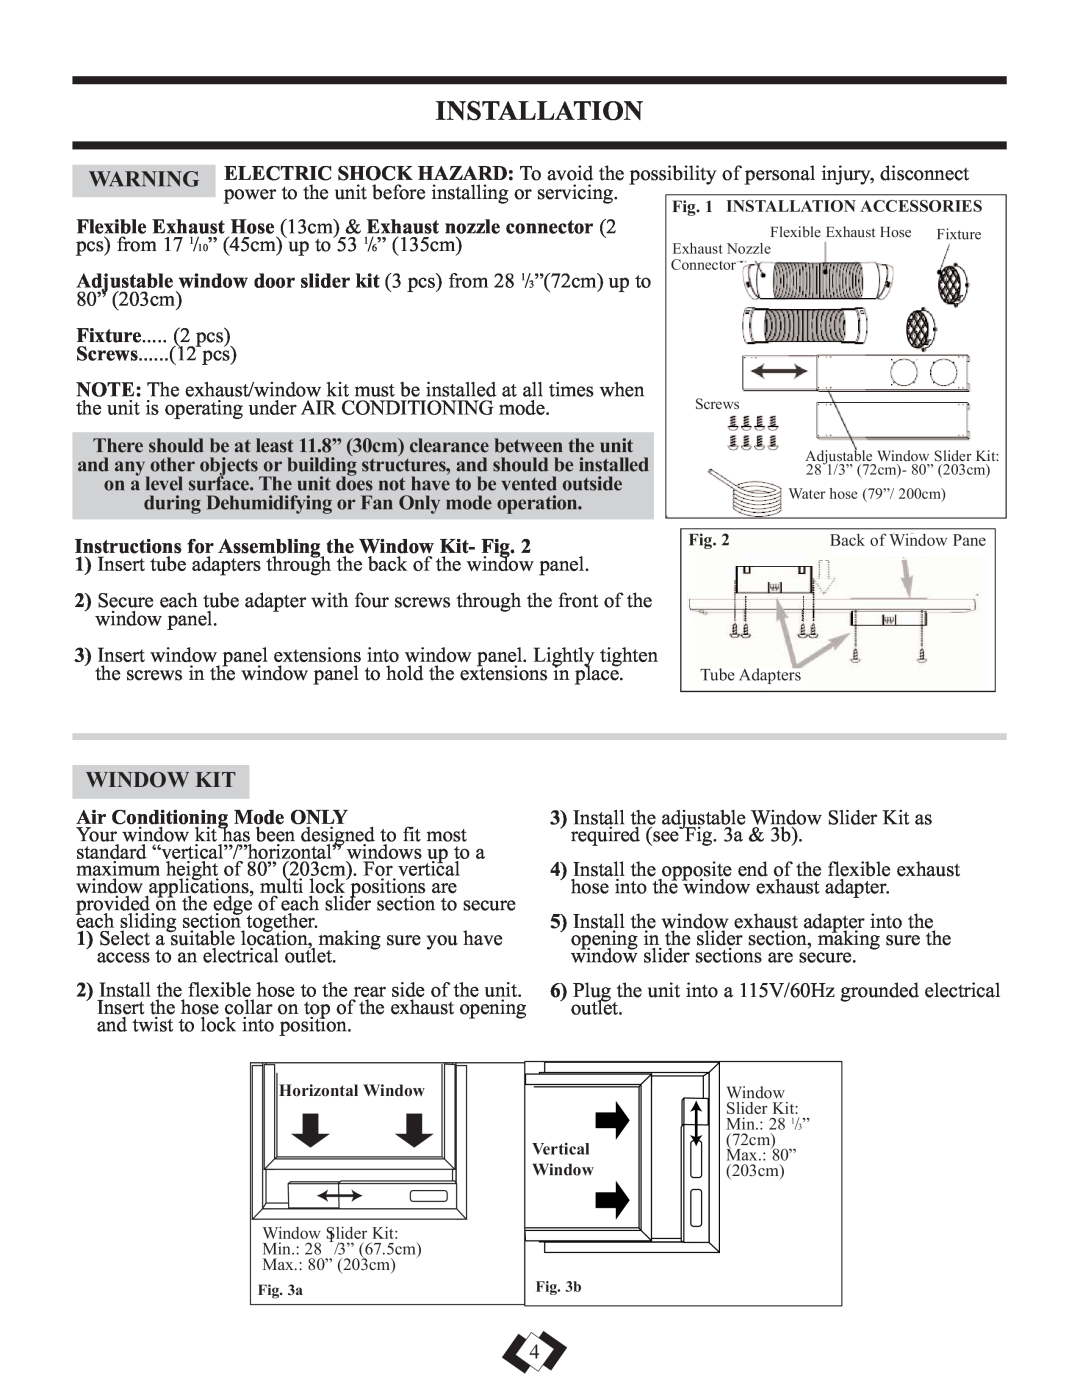 Danby DPAC12010H warranty Installation, Instructions for Assembling the Window Kit- Fig, Air Conditioning Mode ONLY 